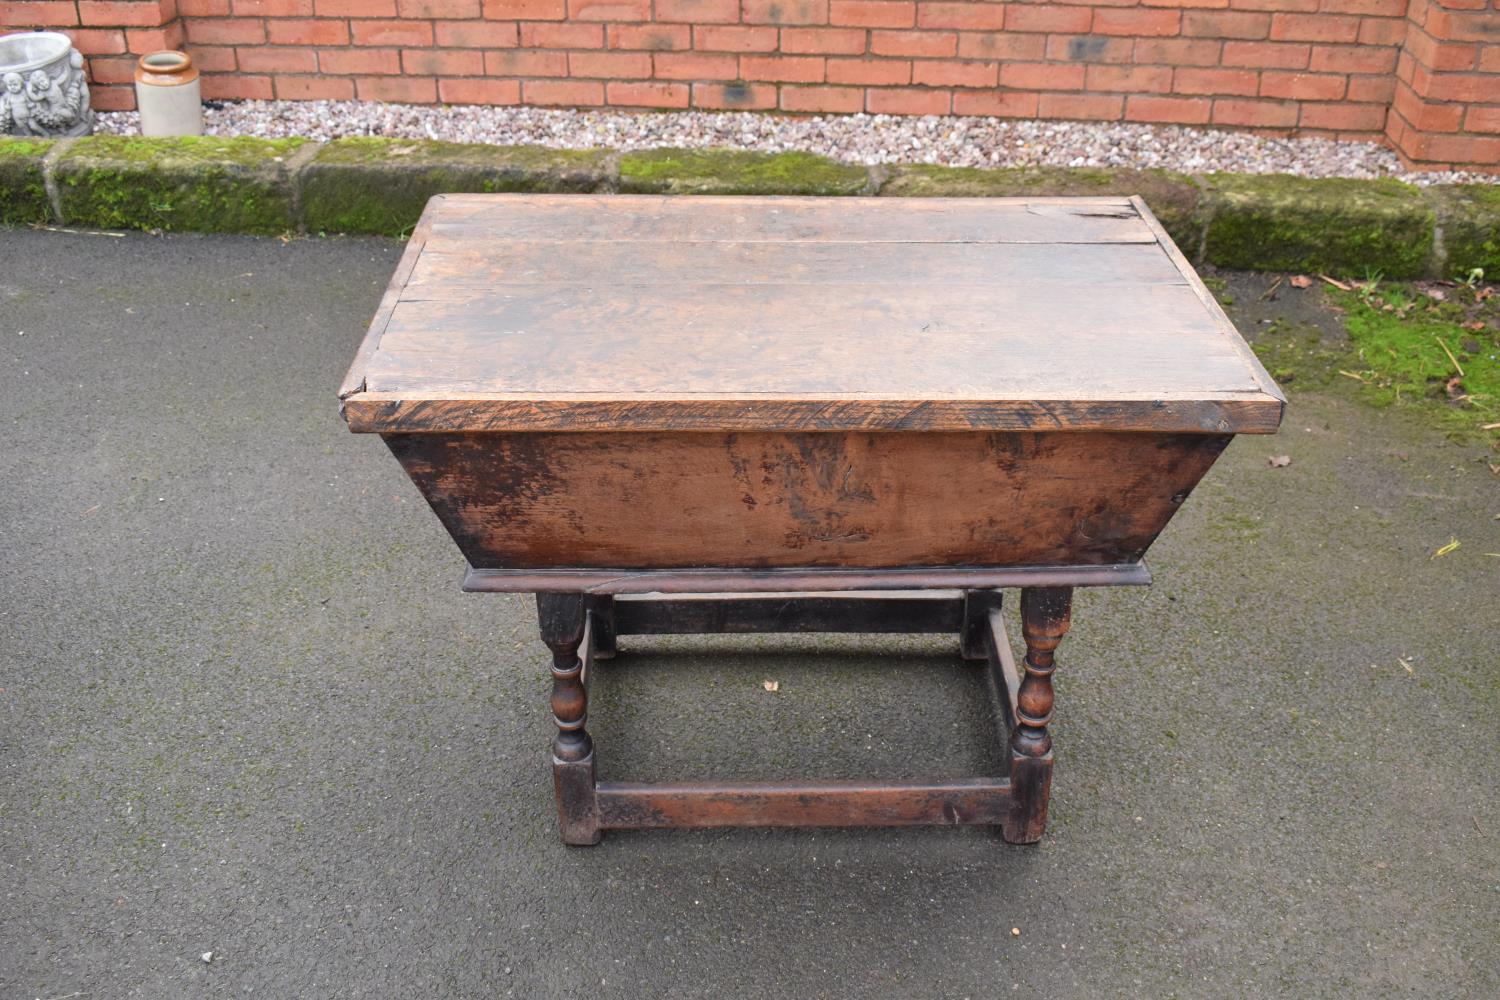 Victorian Oak dough bin with lift off lid. In good condition with age related wear as expected.